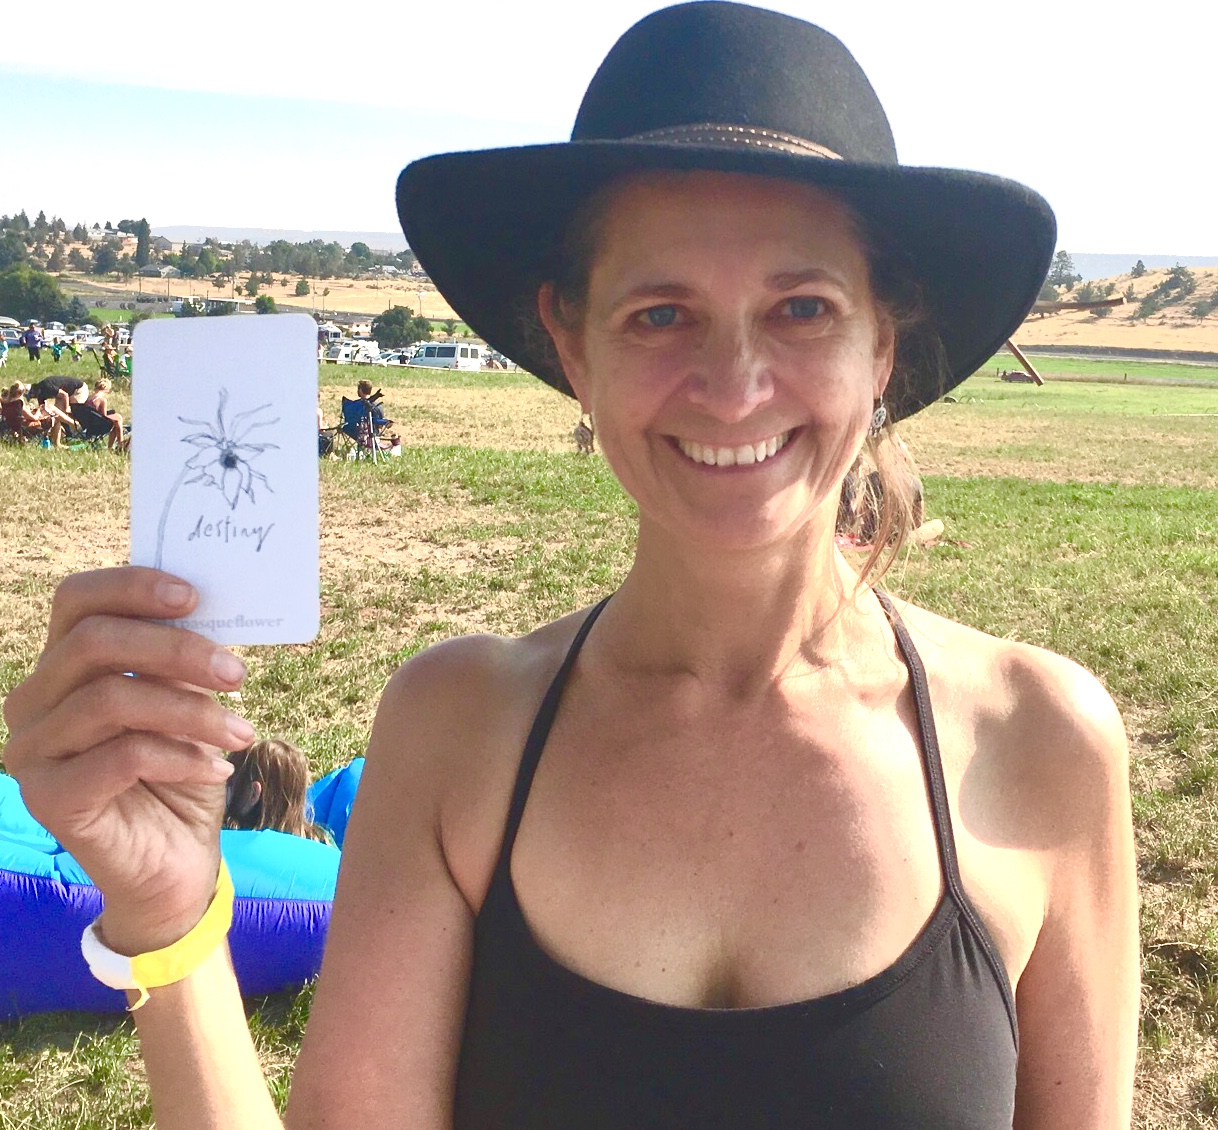 Shannon mong, Director of Innovation Initiatives, found destiny at the solar exclipse in 2017. A few months later, Telecare began piloting a gratitude program based on these cards.